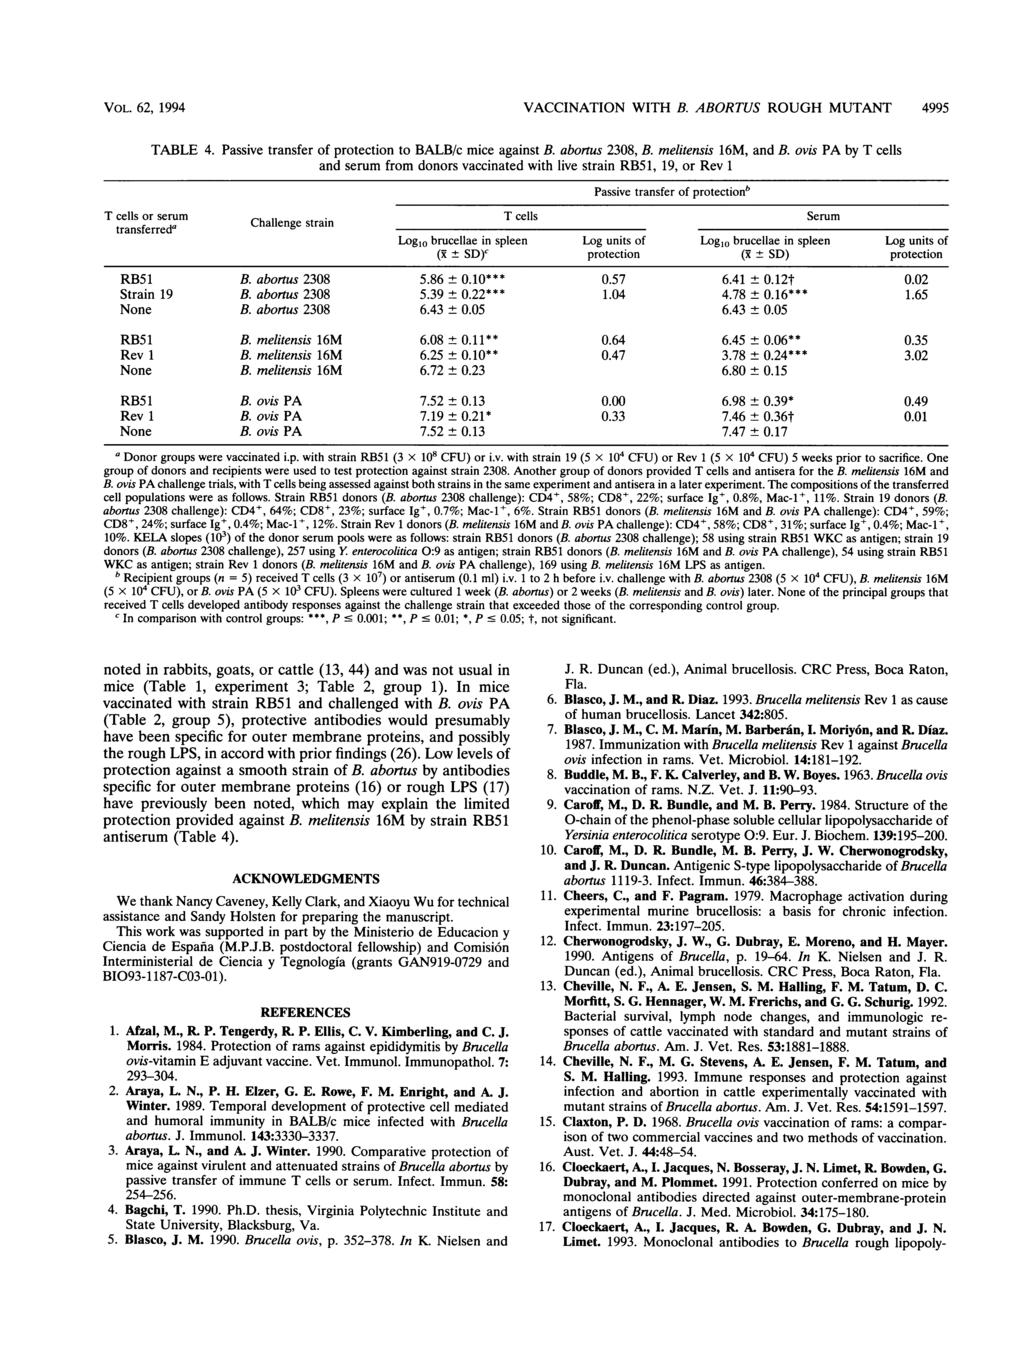 VOL. 62, 1994 VACCINATION WITH B. ABORTUS ROUGH MUTANT 4995 TABLE 4. Passive transfer of protection to BALB/c mice against B. abortus 238, B. melitensis 16M, and B.